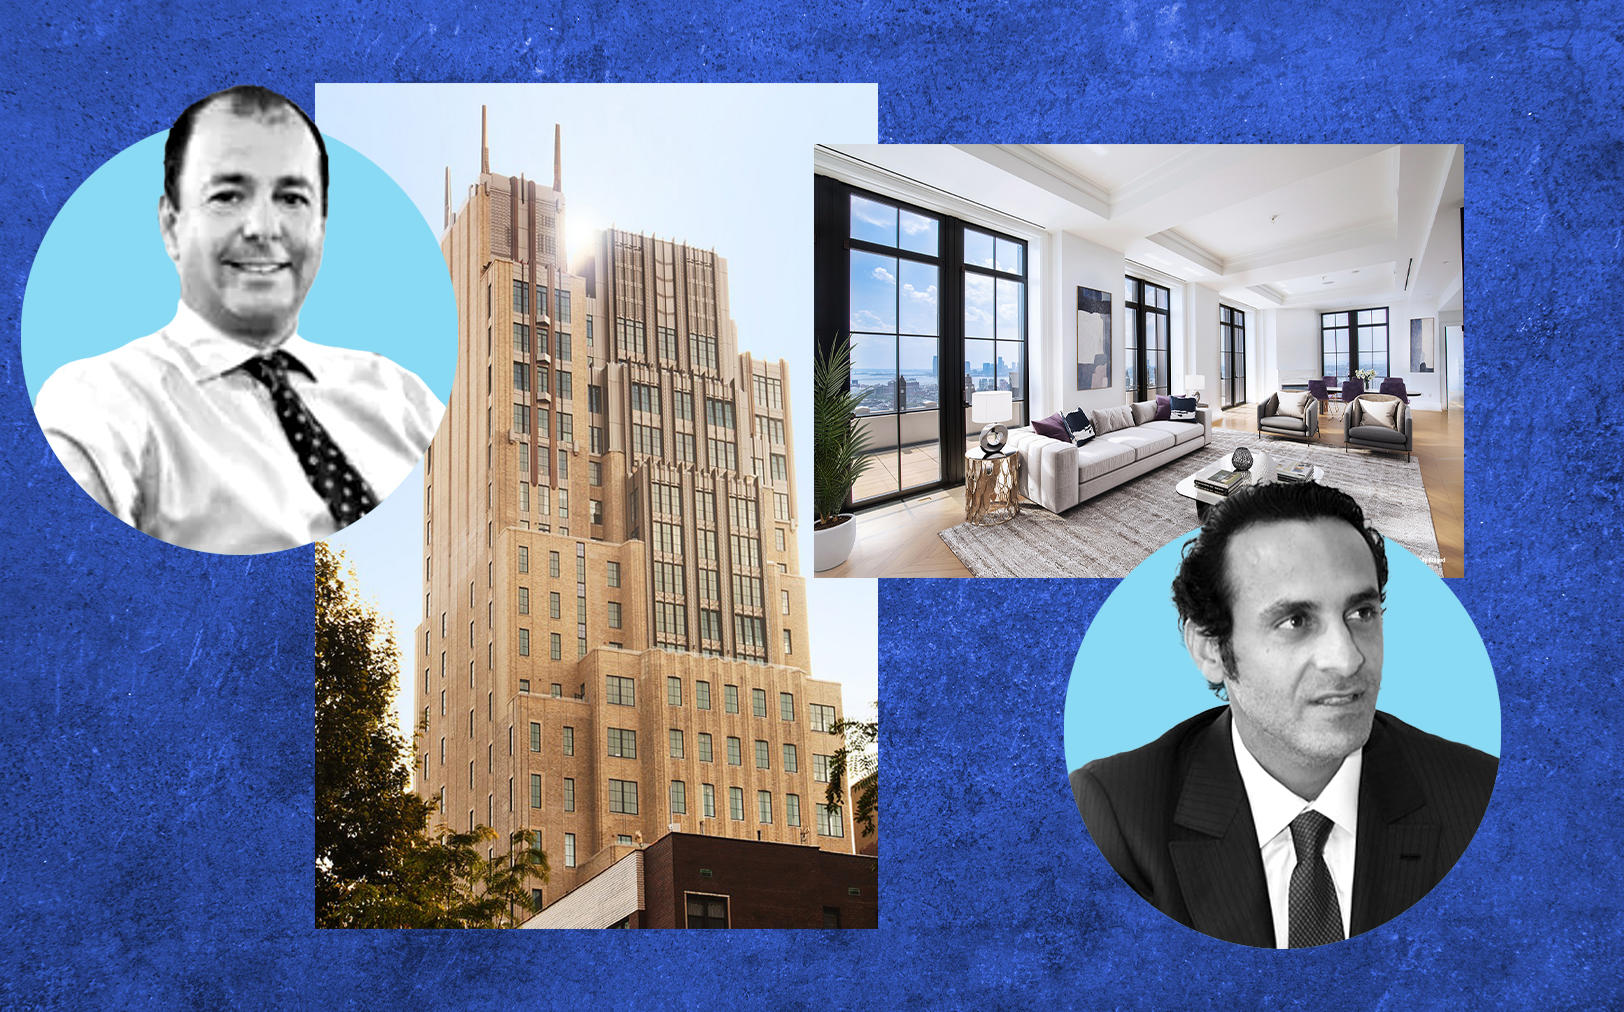 Walker Tower at 212 West 18th Street with in-contract buyer Ron Vinder (left), and prior owner Khadem al-Qubaisi (right) (Images from JDS Development, Morgan Stanley, Pixabay)